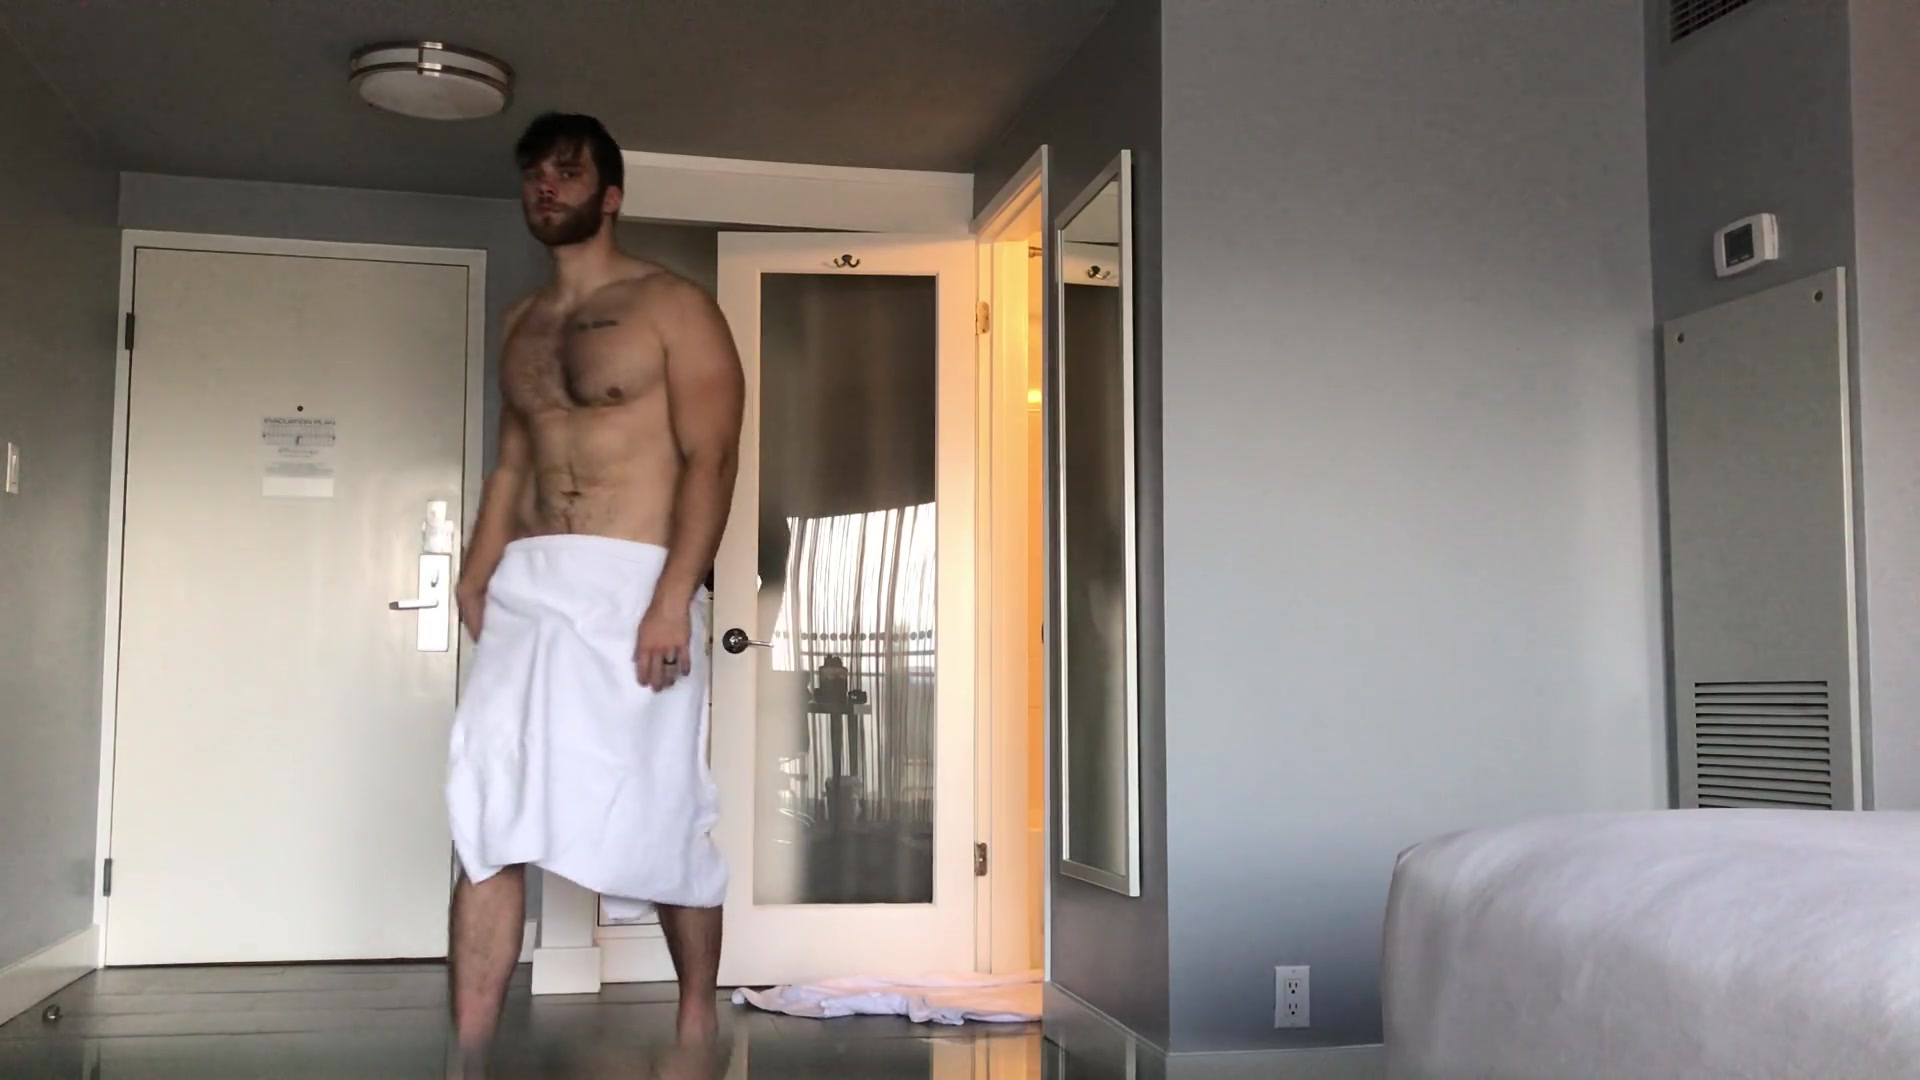 Taking a shower - video 7